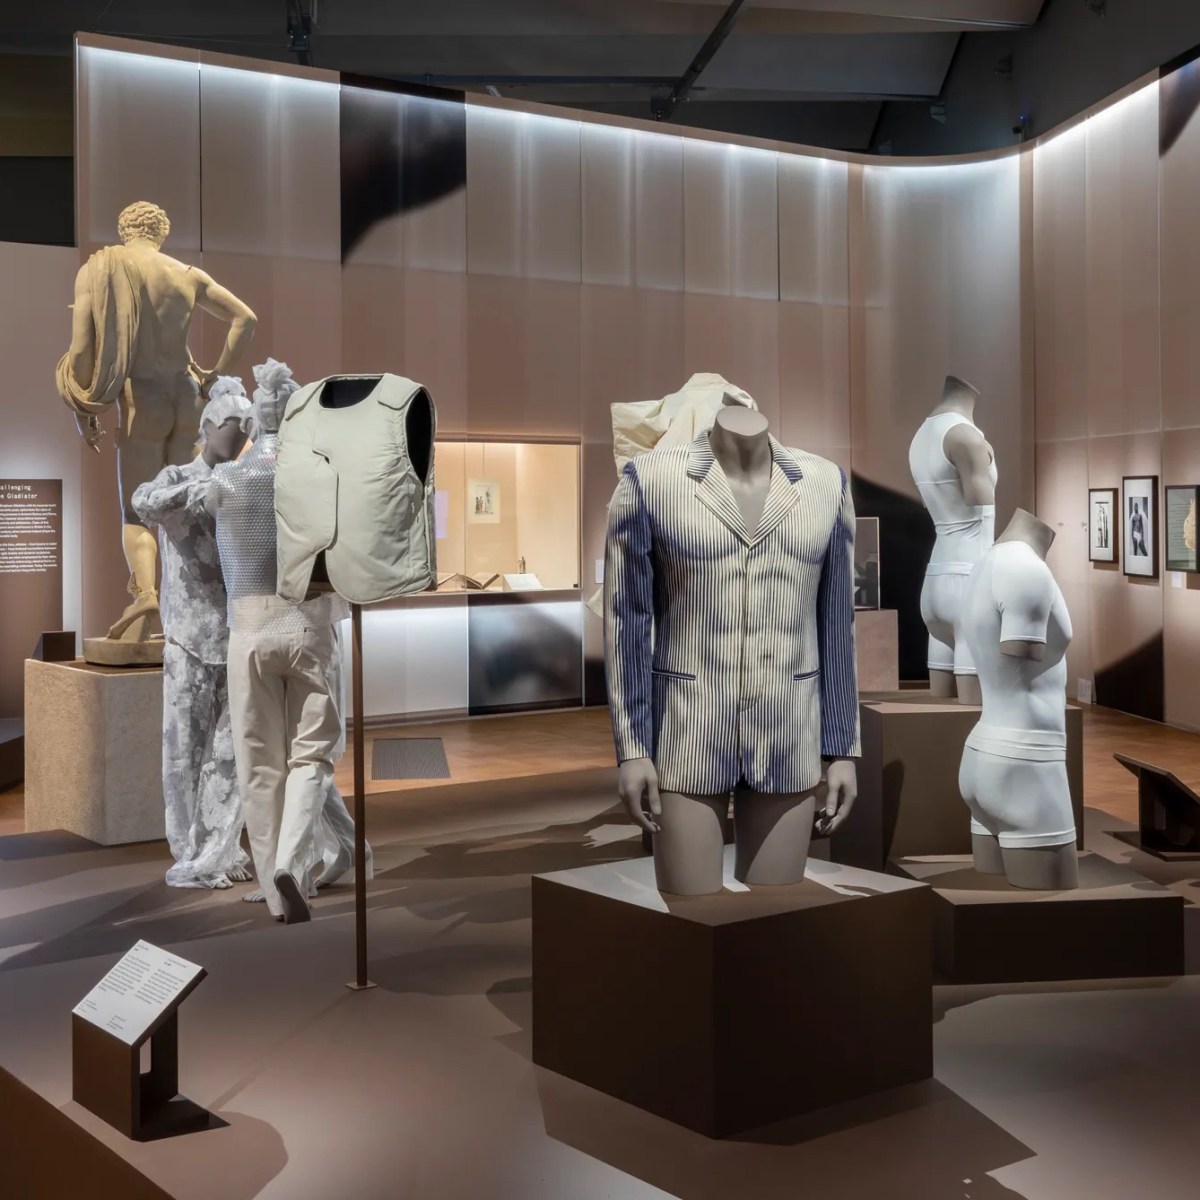 The Art of Menswear” Exhibit Confronts Gender Constructs – COOL HUNTING®